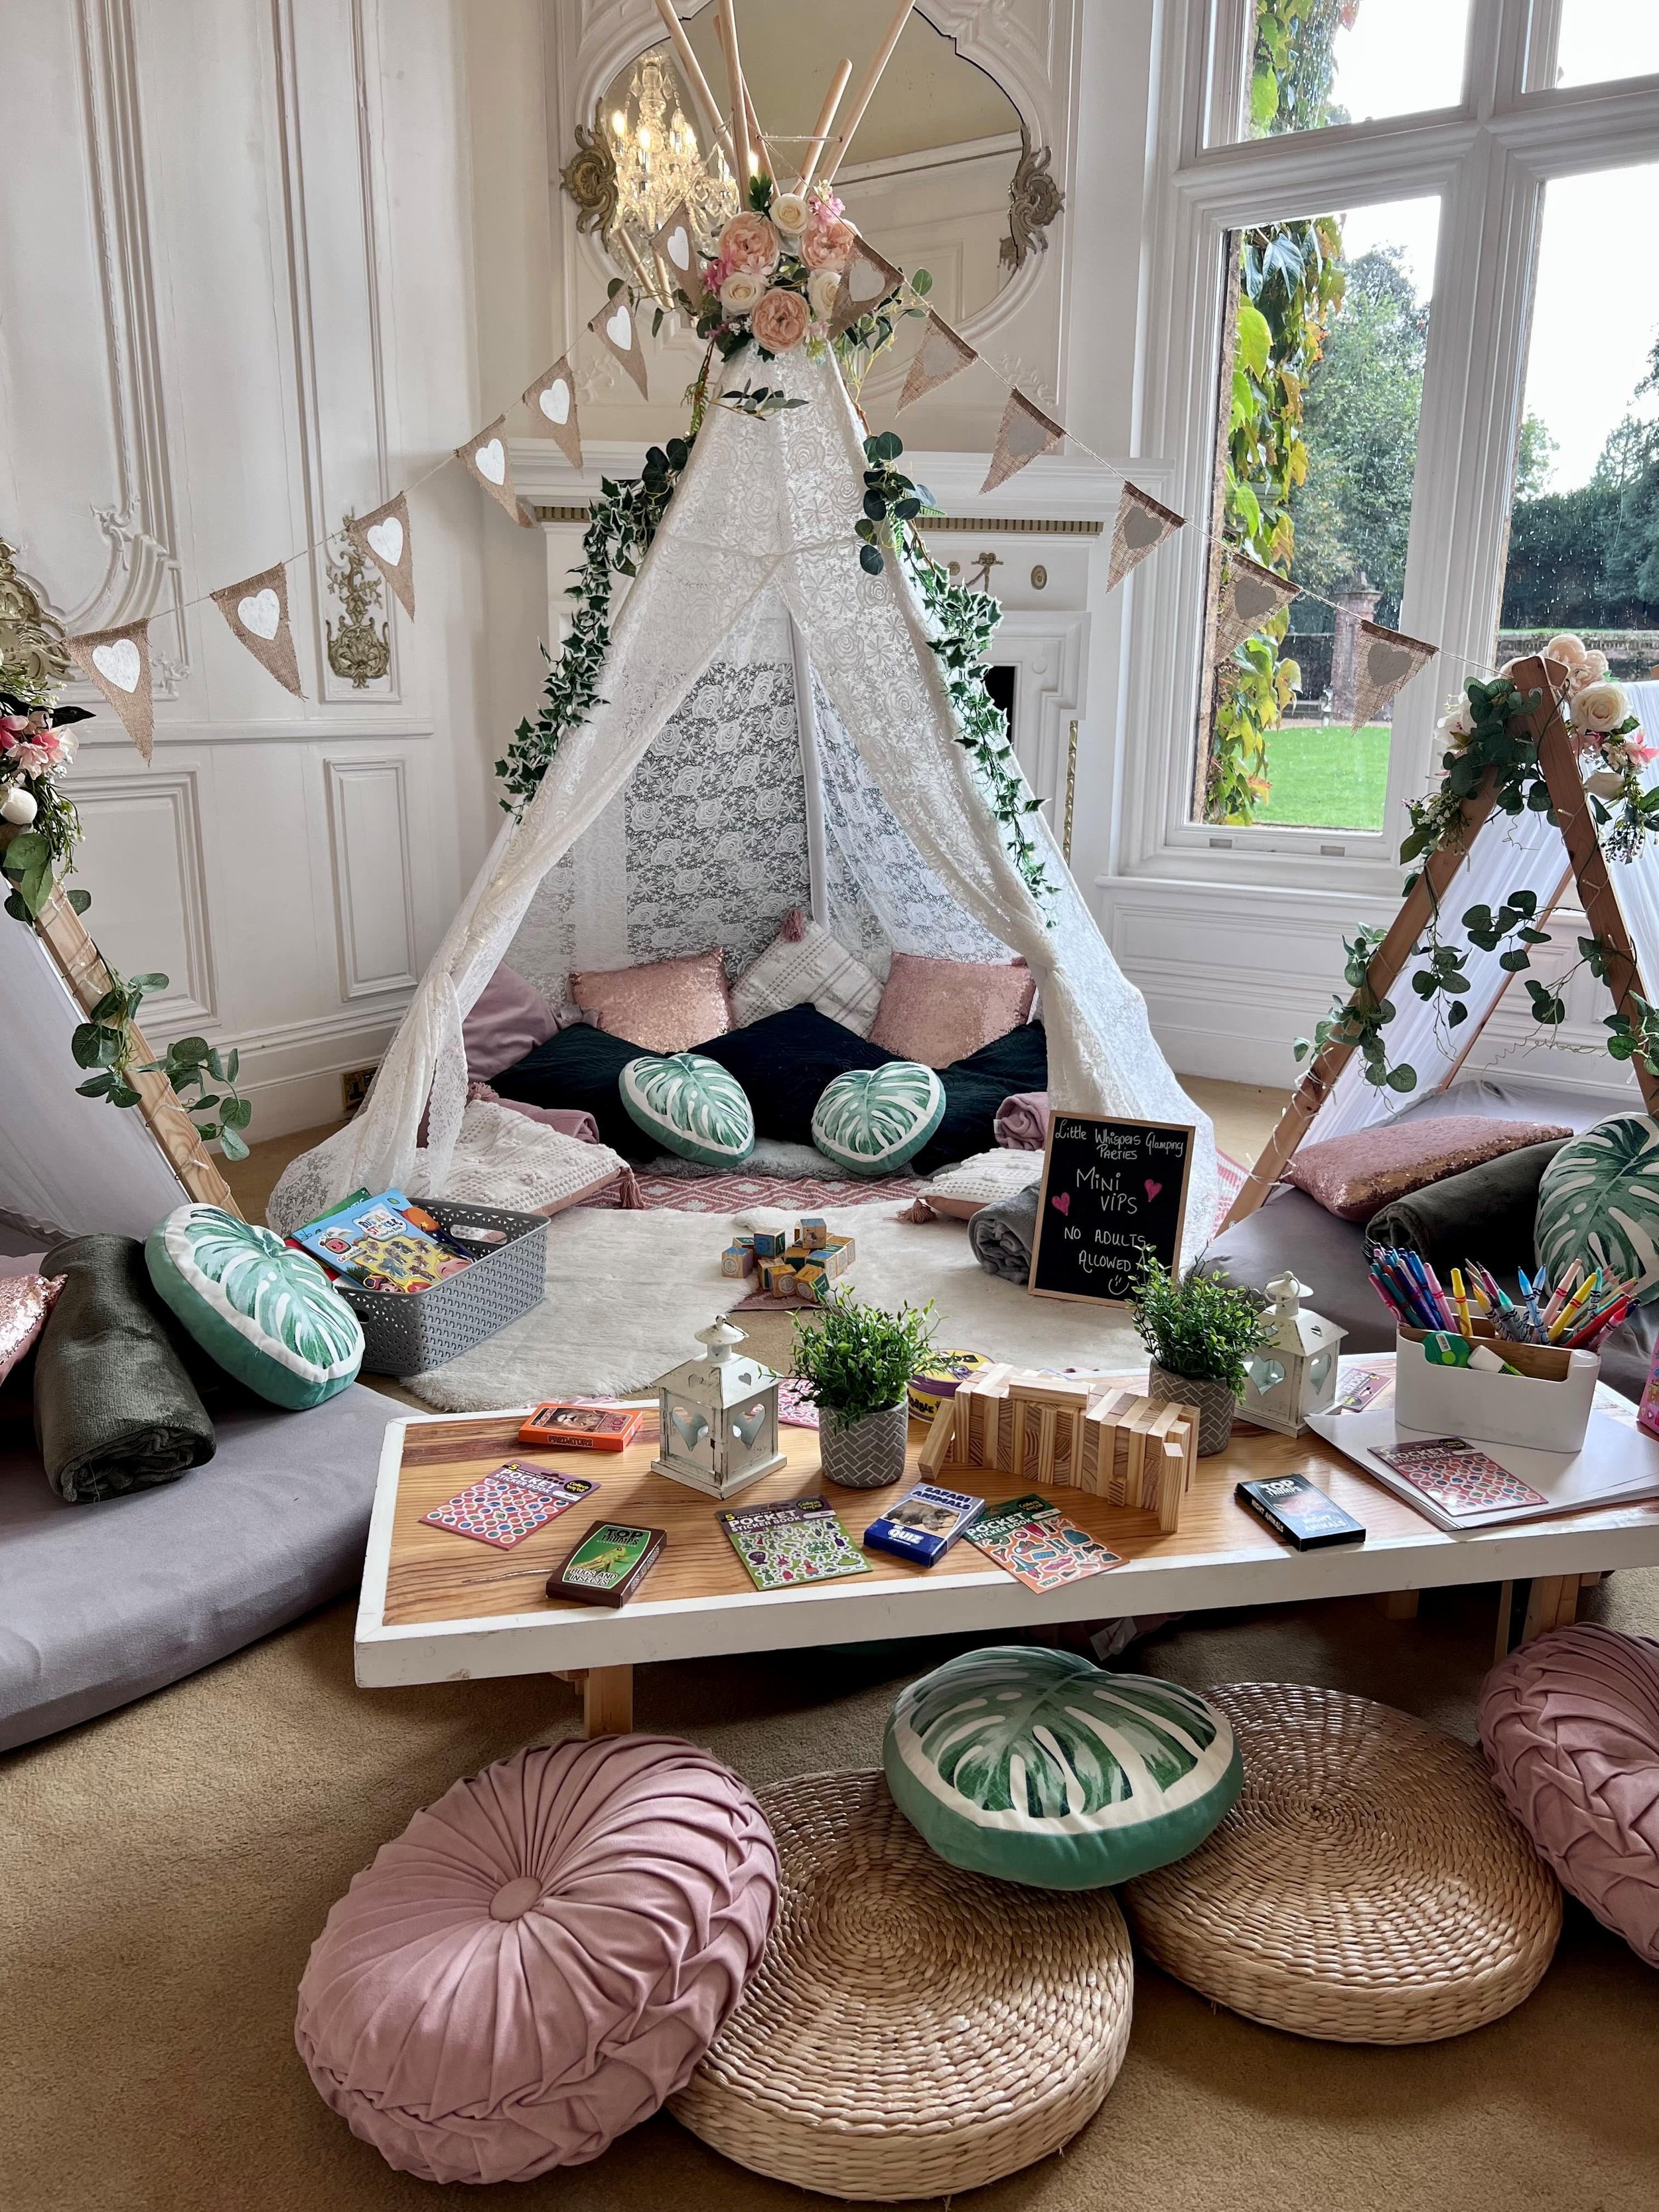 Little Whispers Glamping Co- Sleepover Party Tents in Northamptonshire